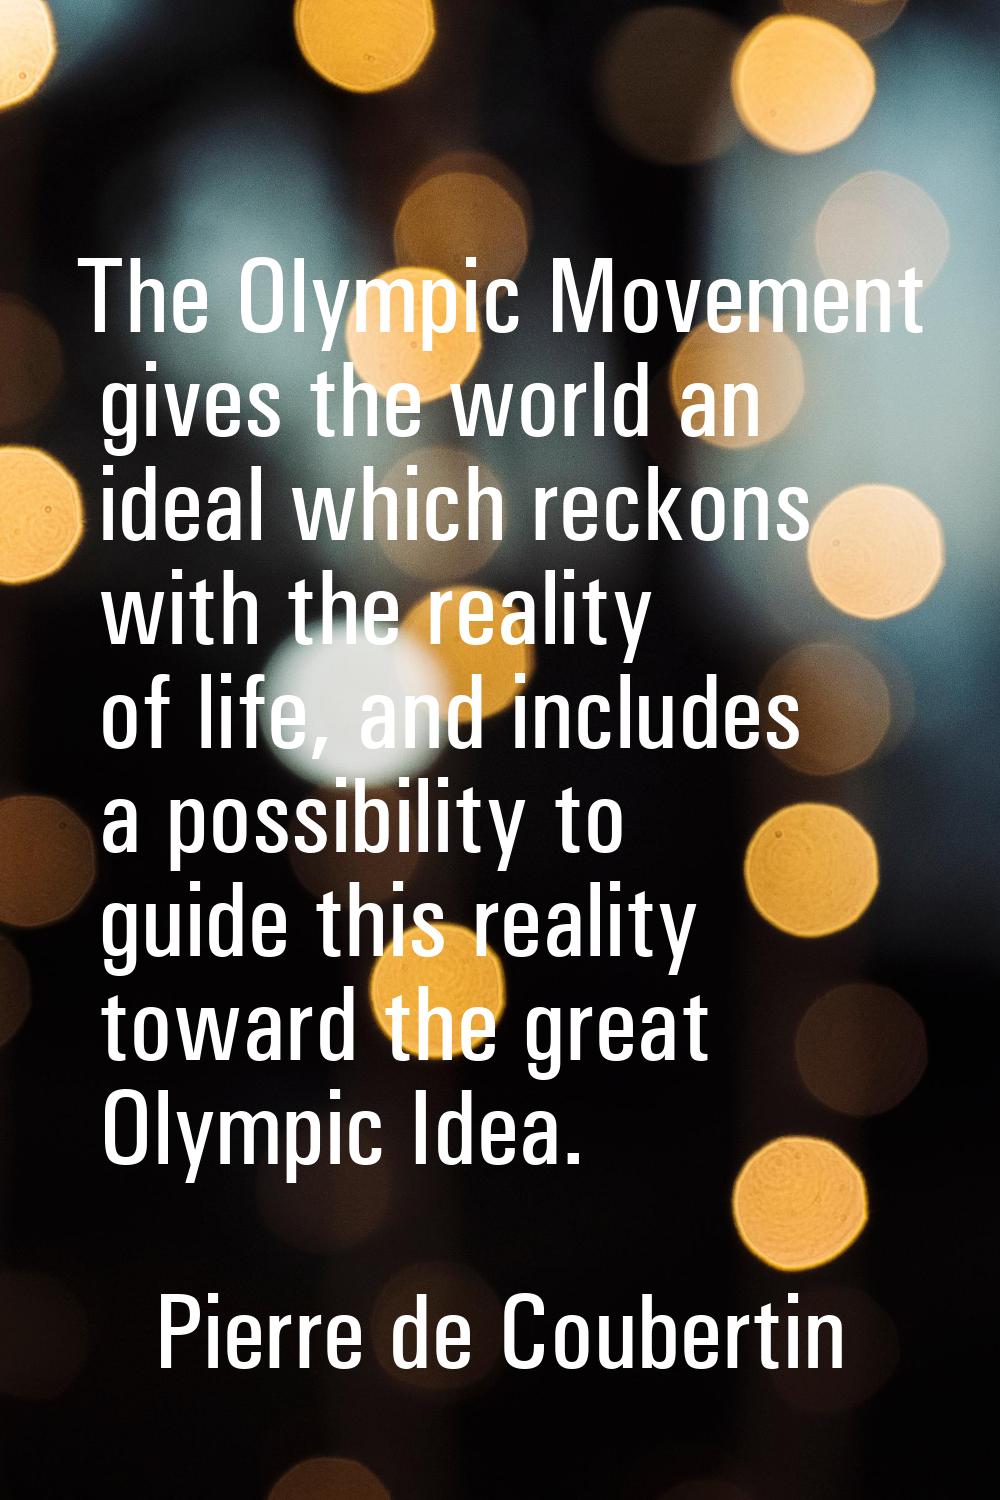 The Olympic Movement gives the world an ideal which reckons with the reality of life, and includes 